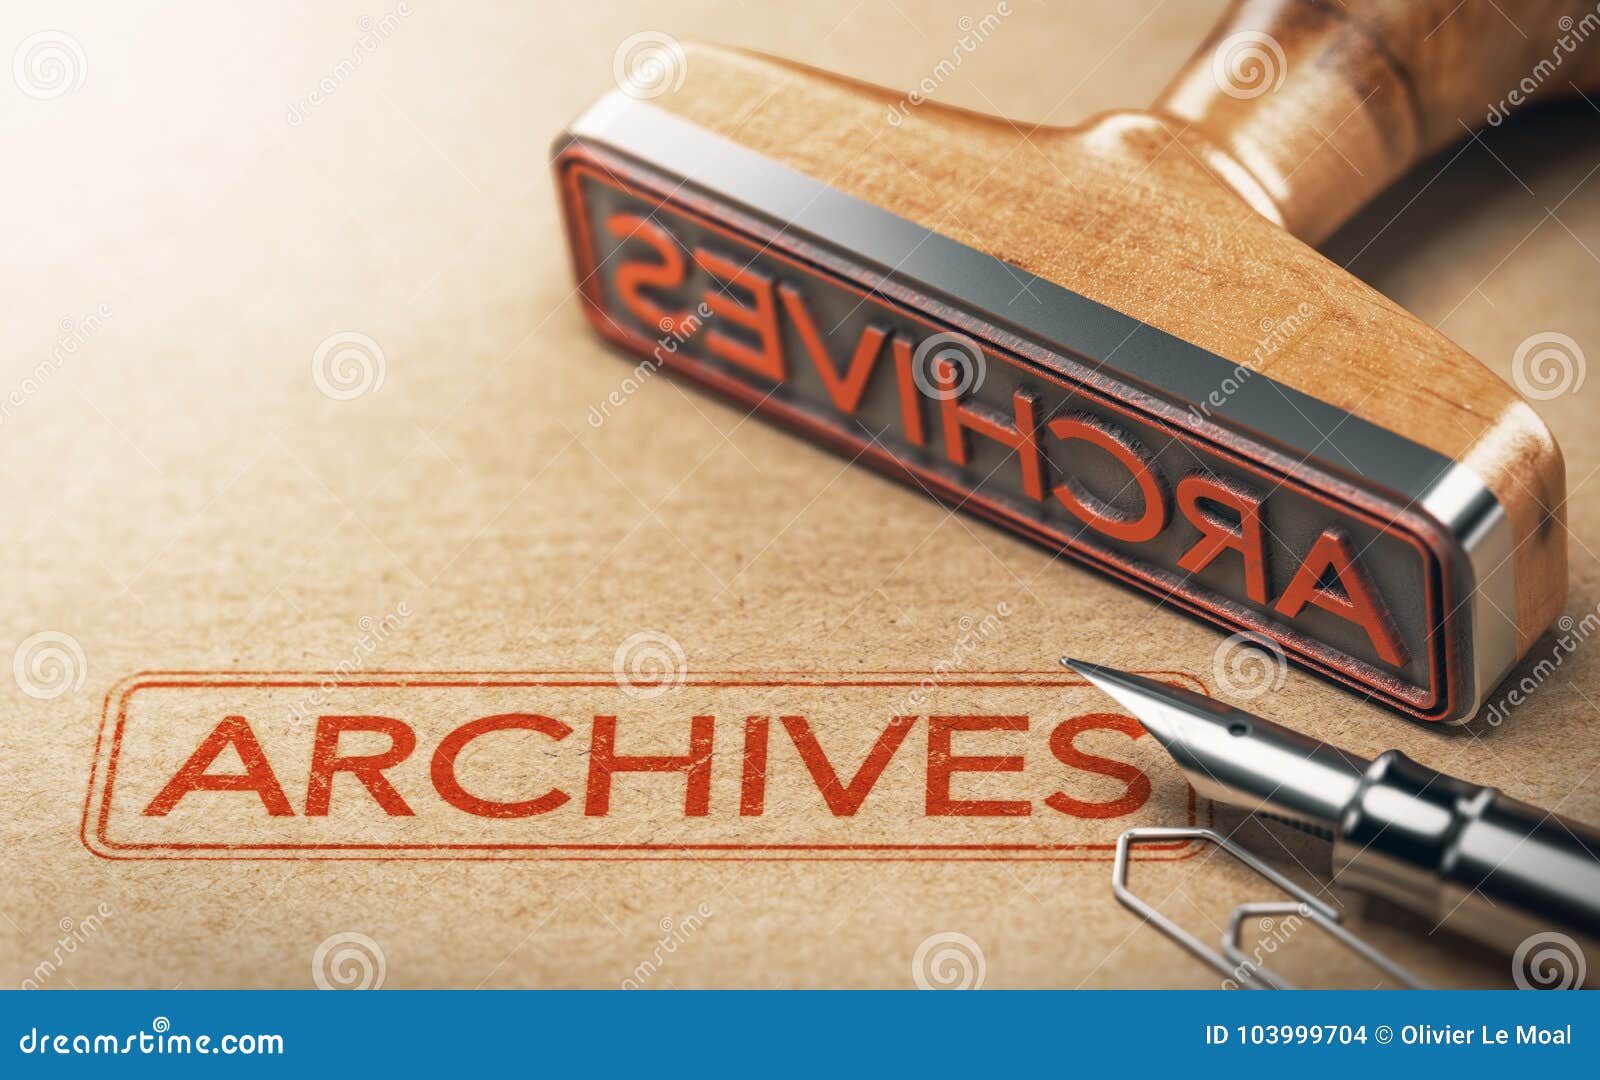 archives, archived documents